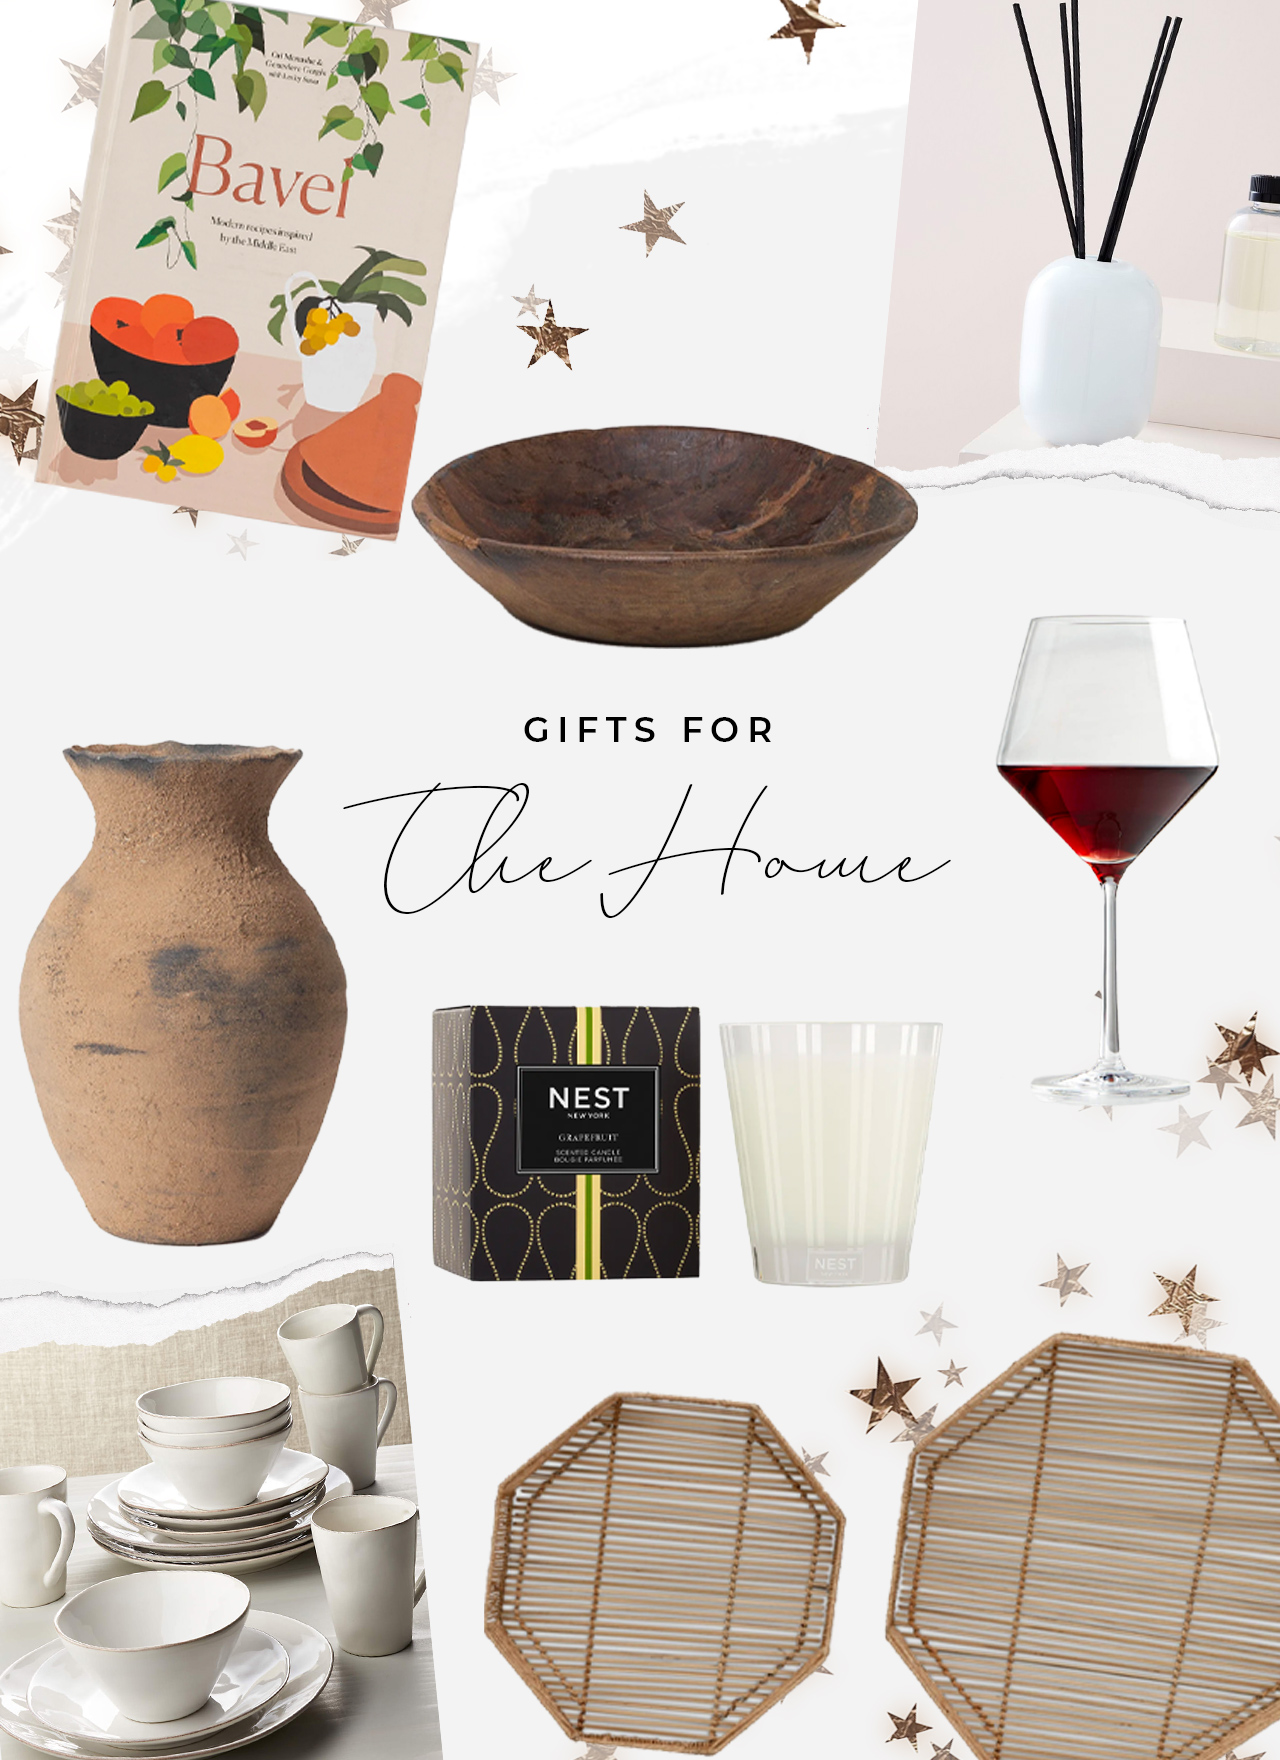 Gifts For home gift guide christmas winter season holiday giving